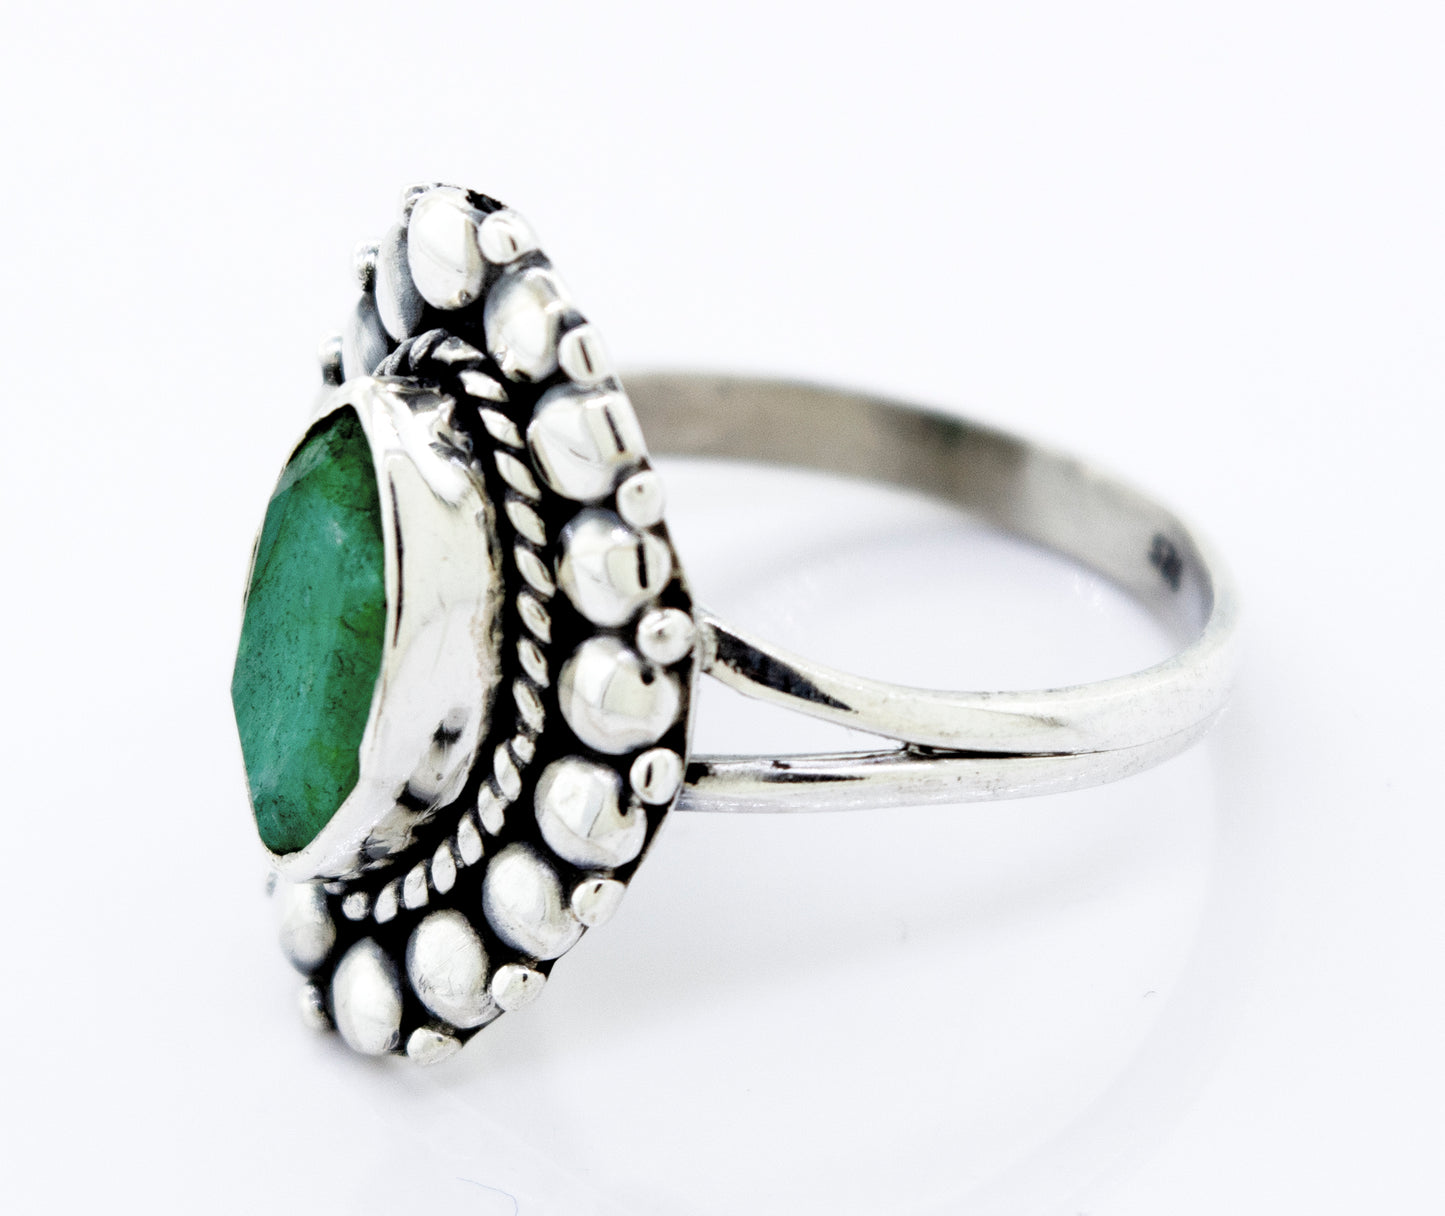 A Super Silver Marquise Shaped Vibrant Emerald Ring with an emerald stone on a white surface.